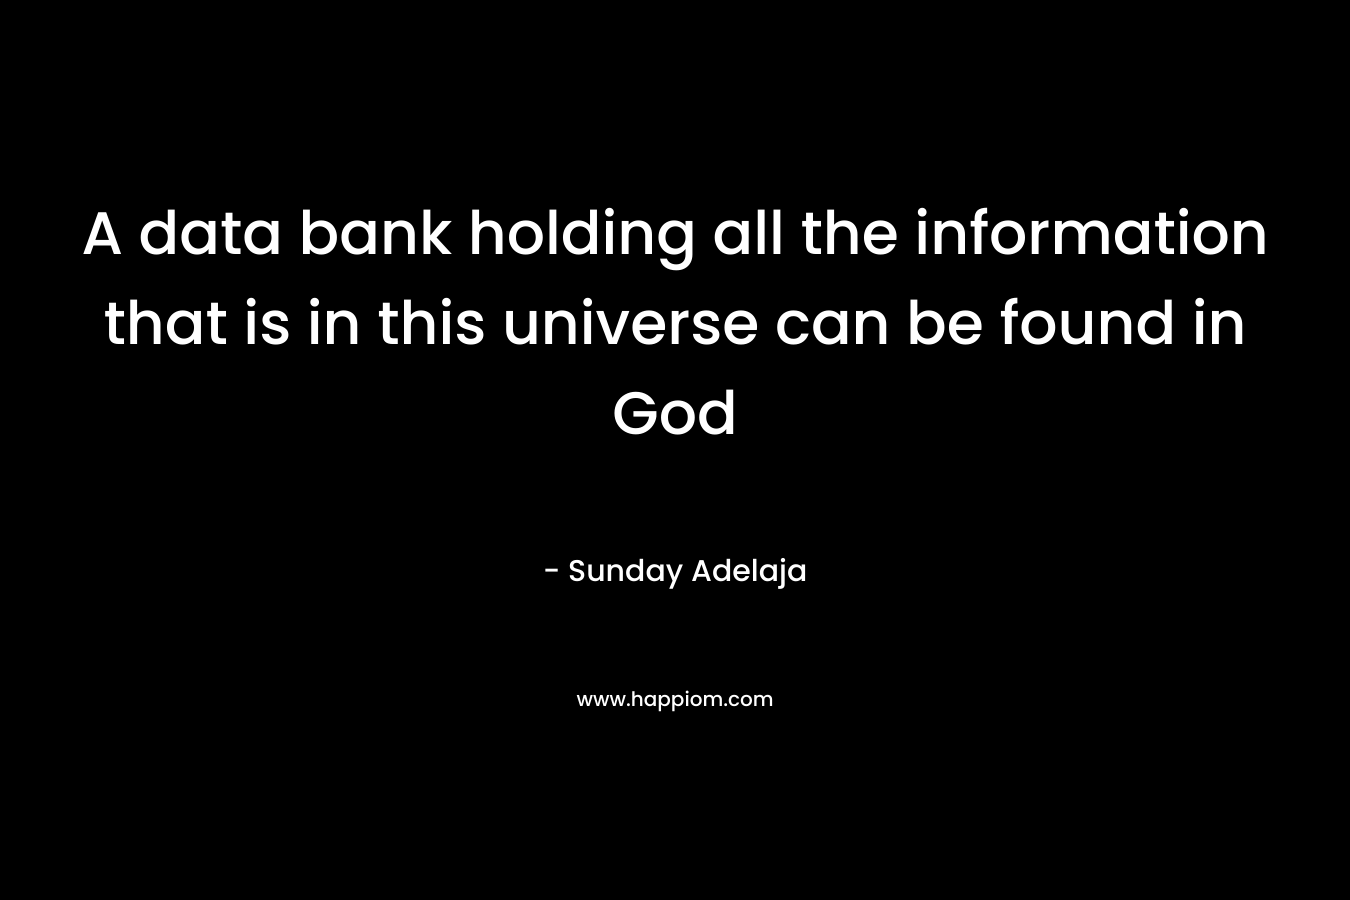 A data bank holding all the information that is in this universe can be found in God